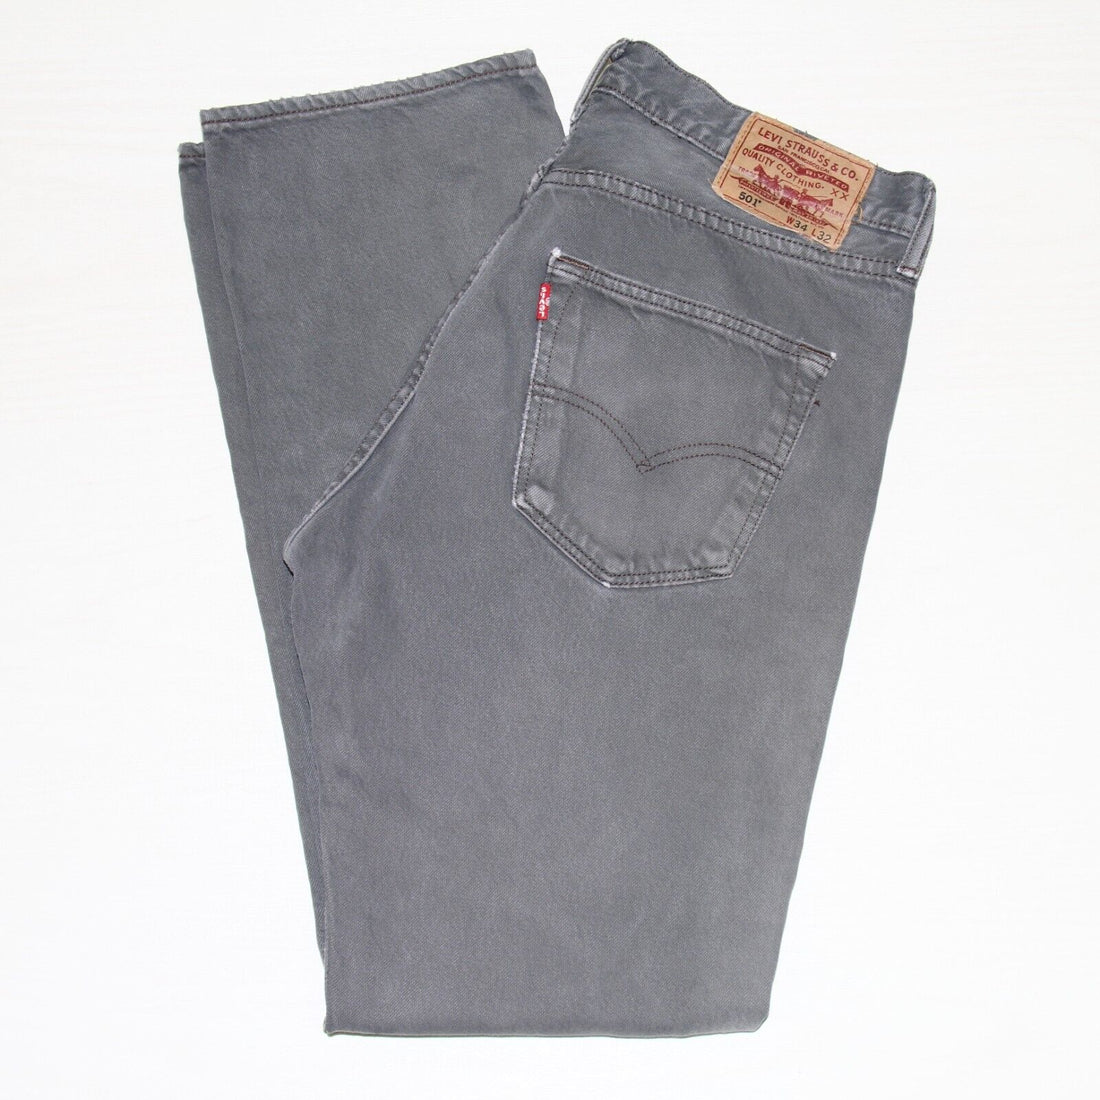 Vintage Levi Strauss & Co 501 Denim Jeans Size 34 X 32 Gray Button Fly –  Throwback Vault